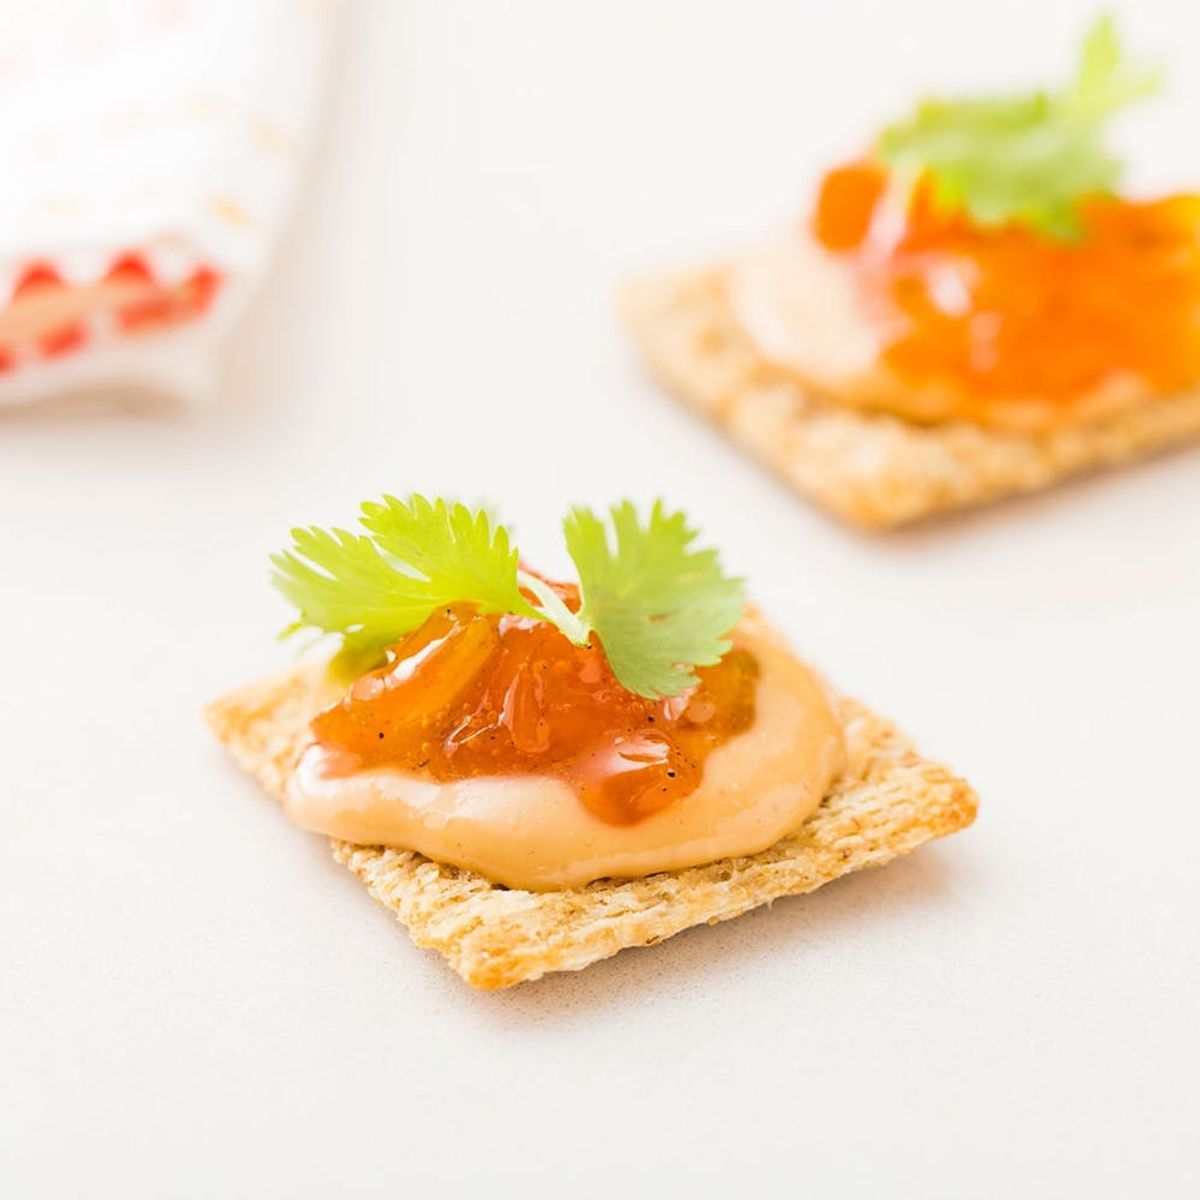 This Appetizer Is the PERFECT Combo of Sweet, Tangy and Nutty